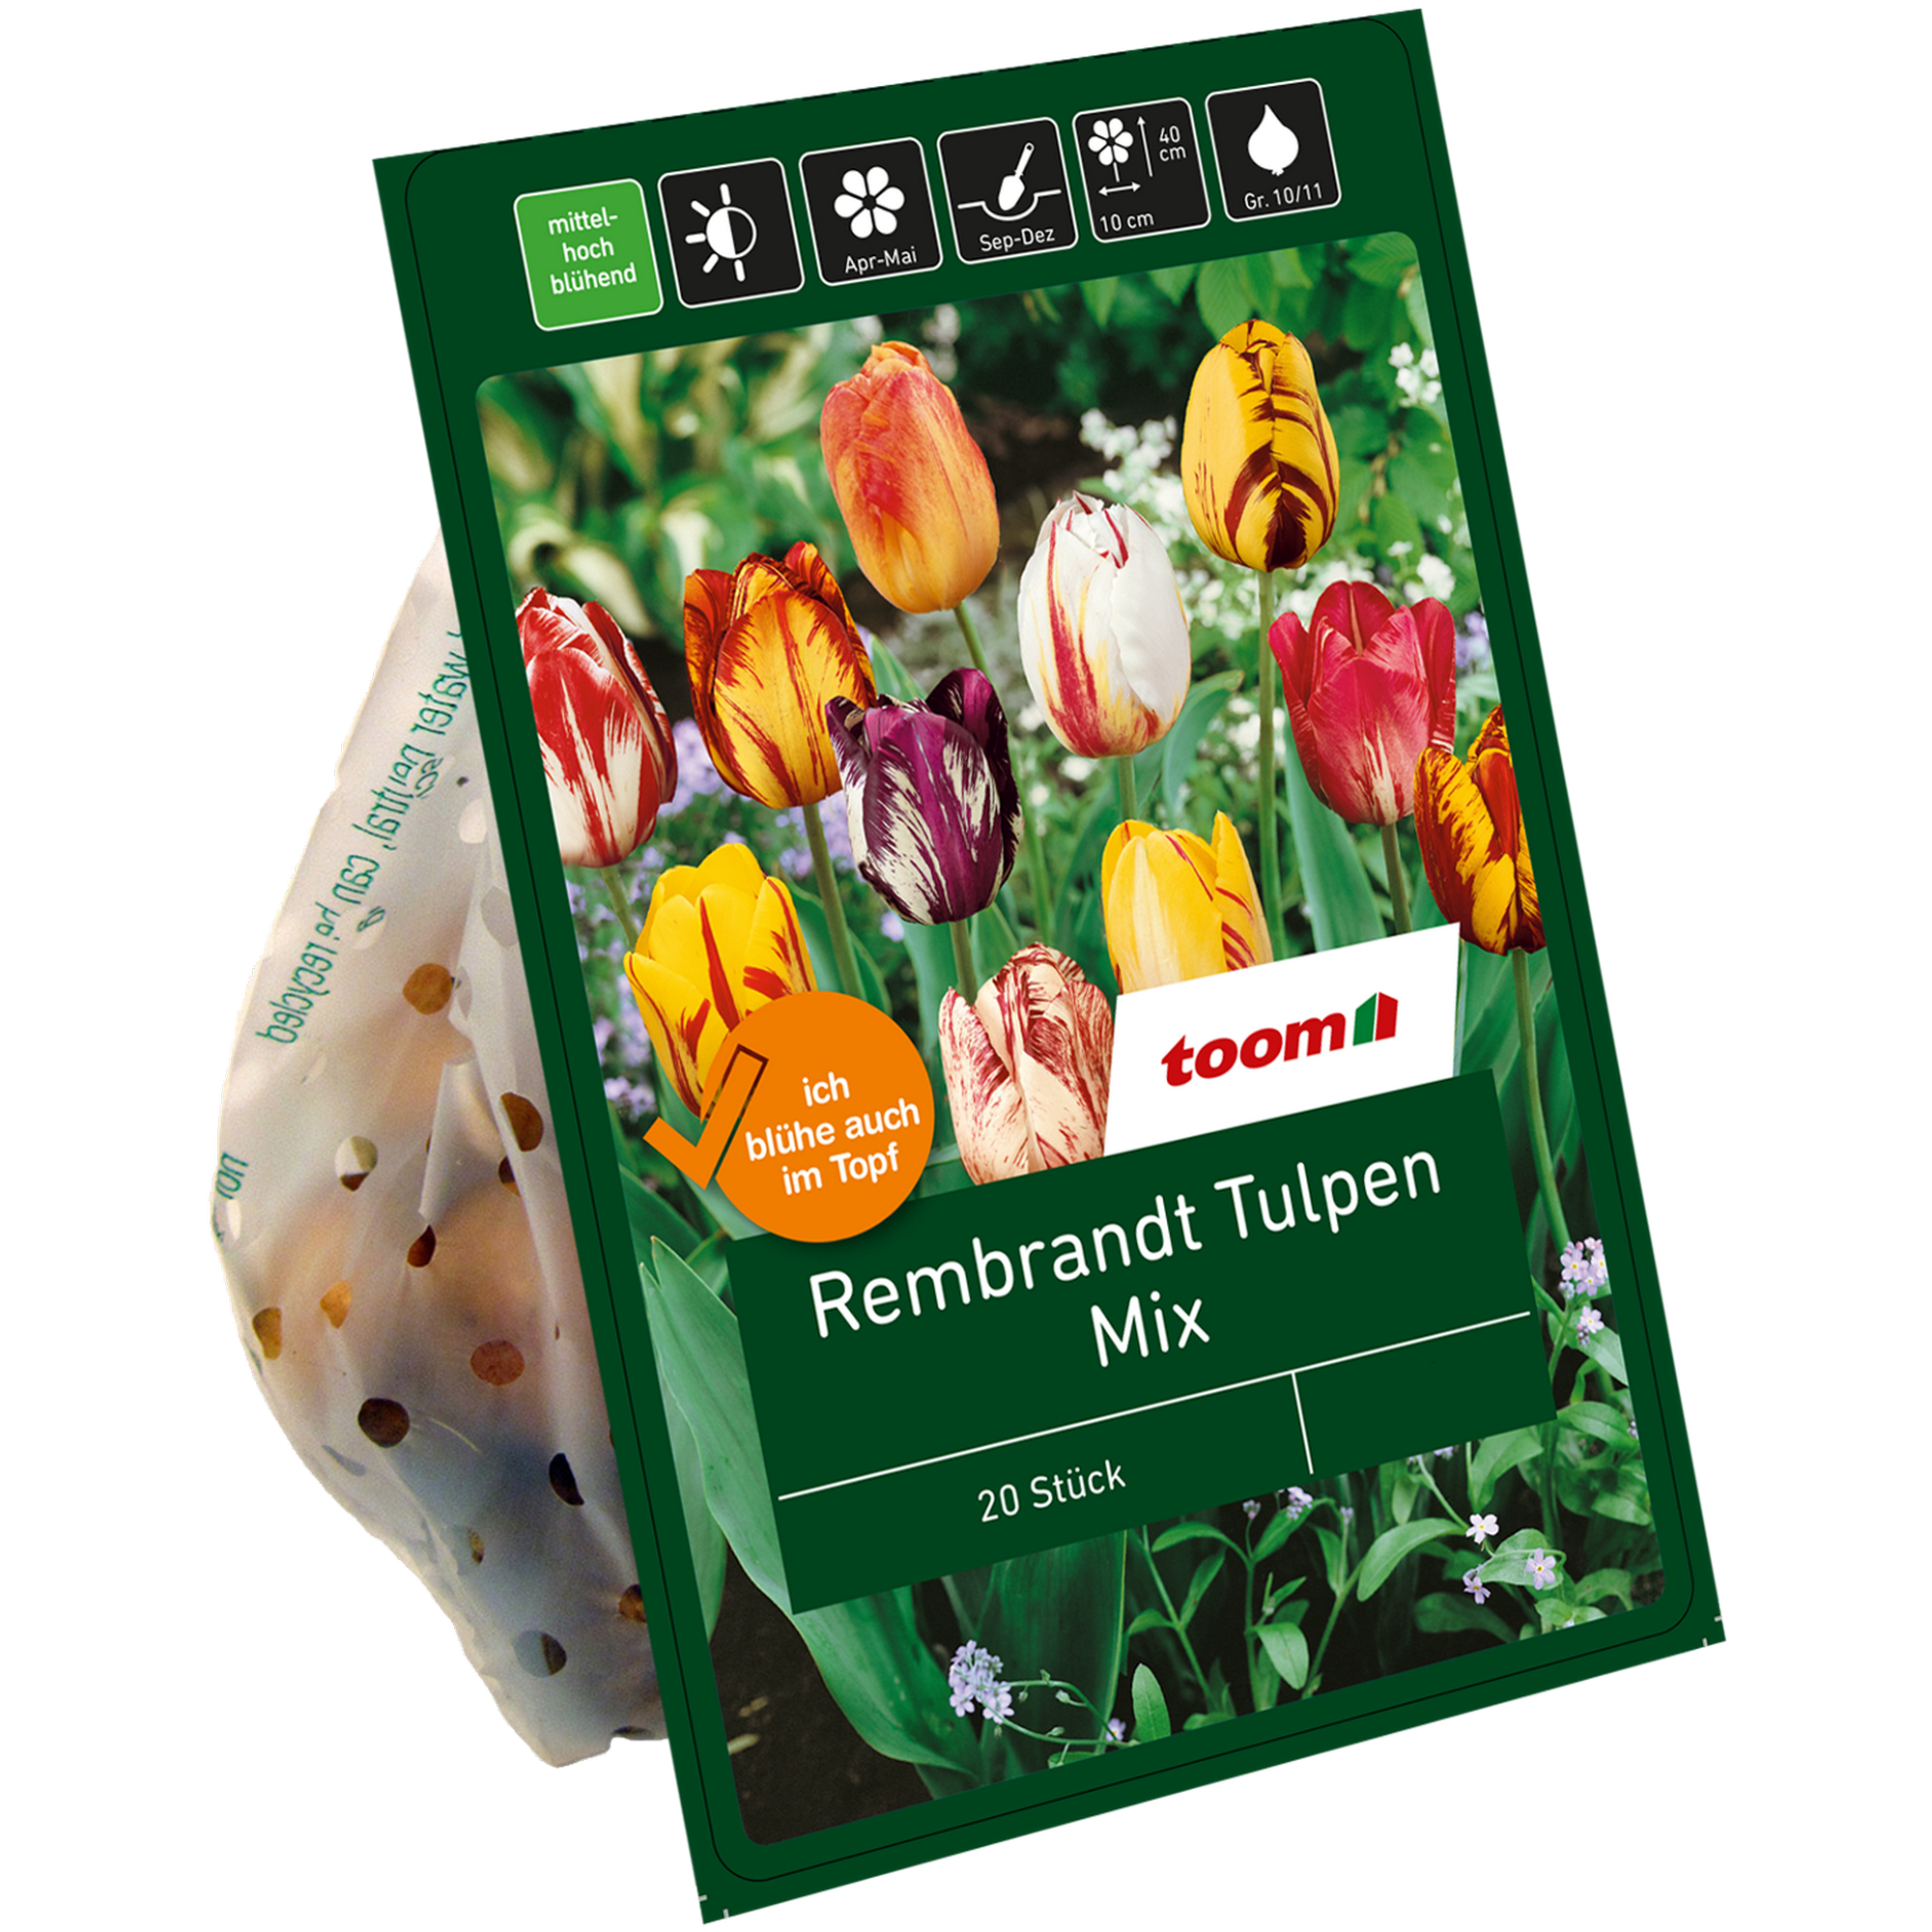 Rembrandt-Tulpen-Mix 20 Zwiebeln + product picture